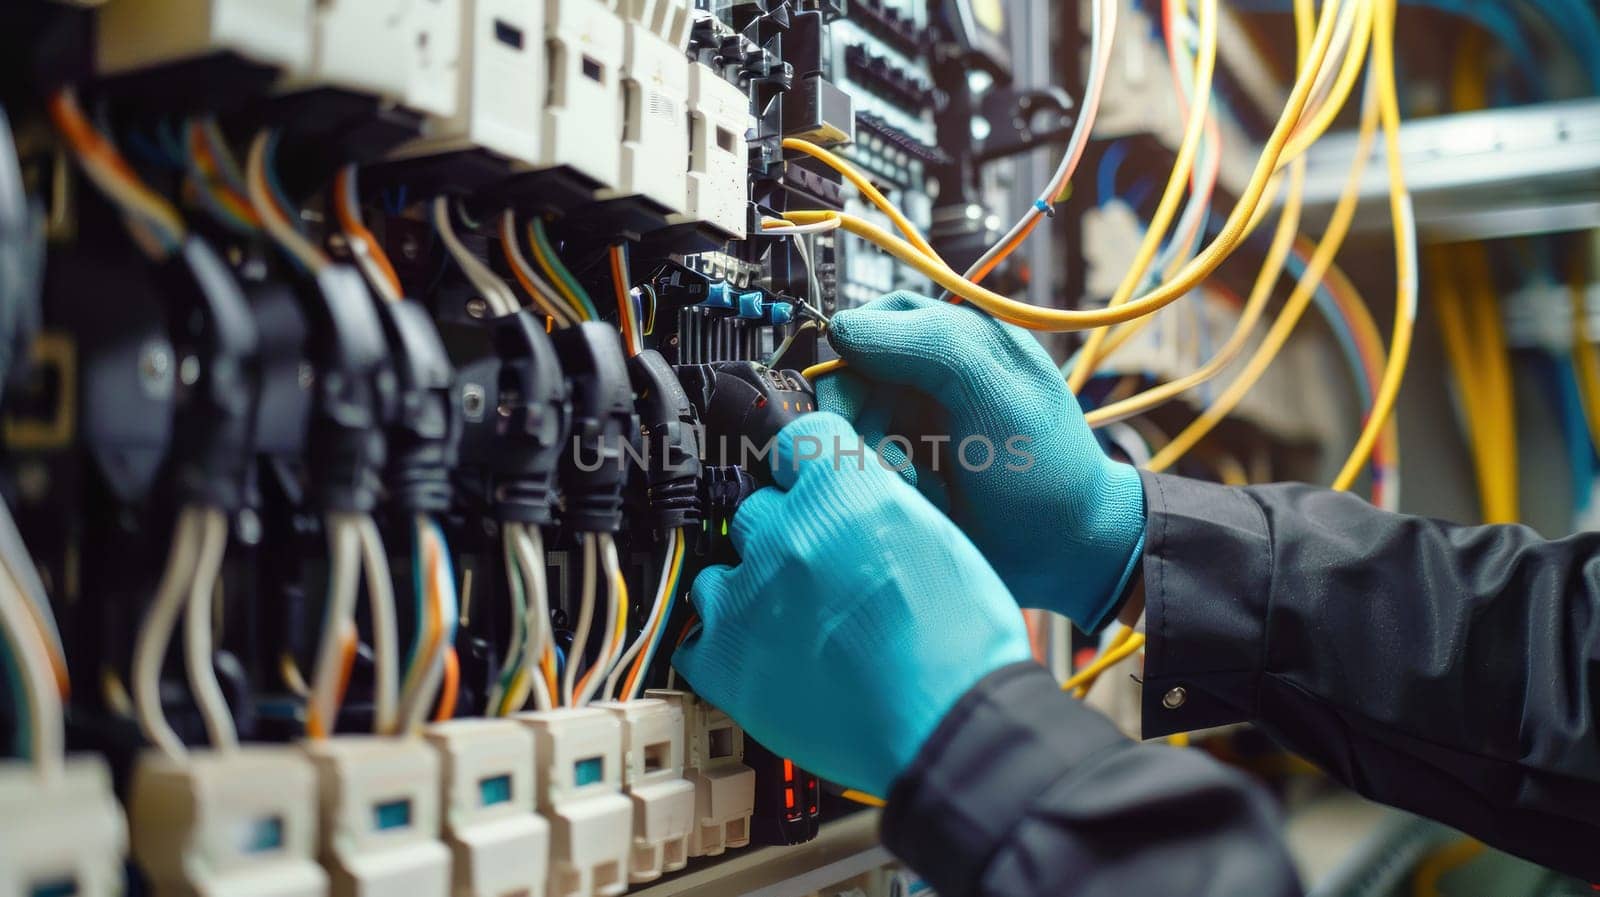 A man is working on a power box with his hands in blue gloves. Concept of caution and precision as the man carefully handles the wires and equipment